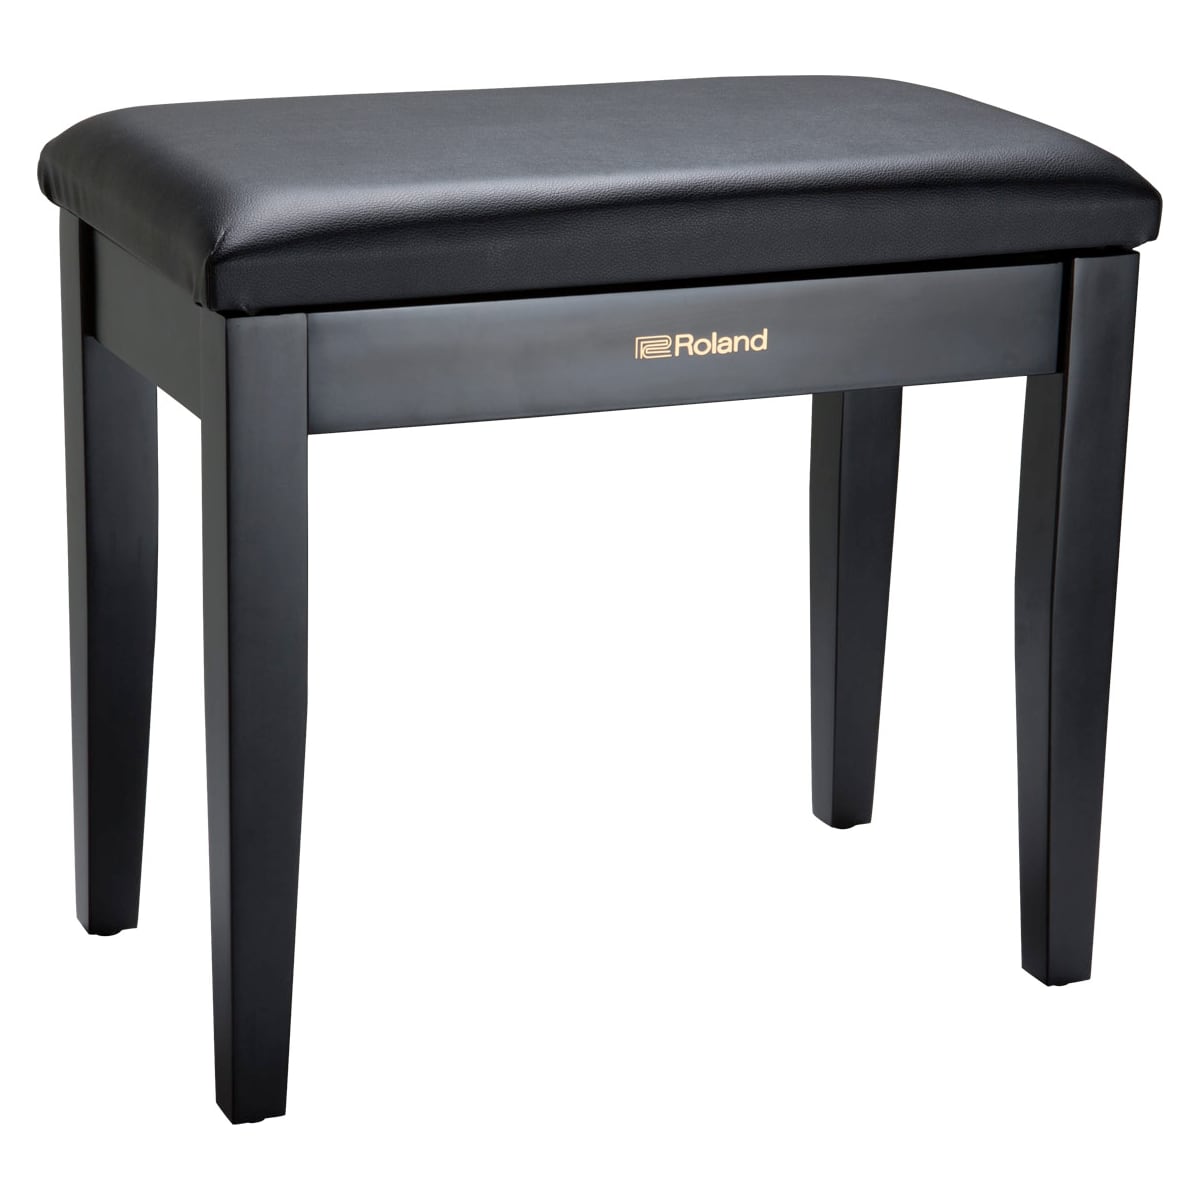 Roland RPB-100BK Piano Bench with Storage Compartment